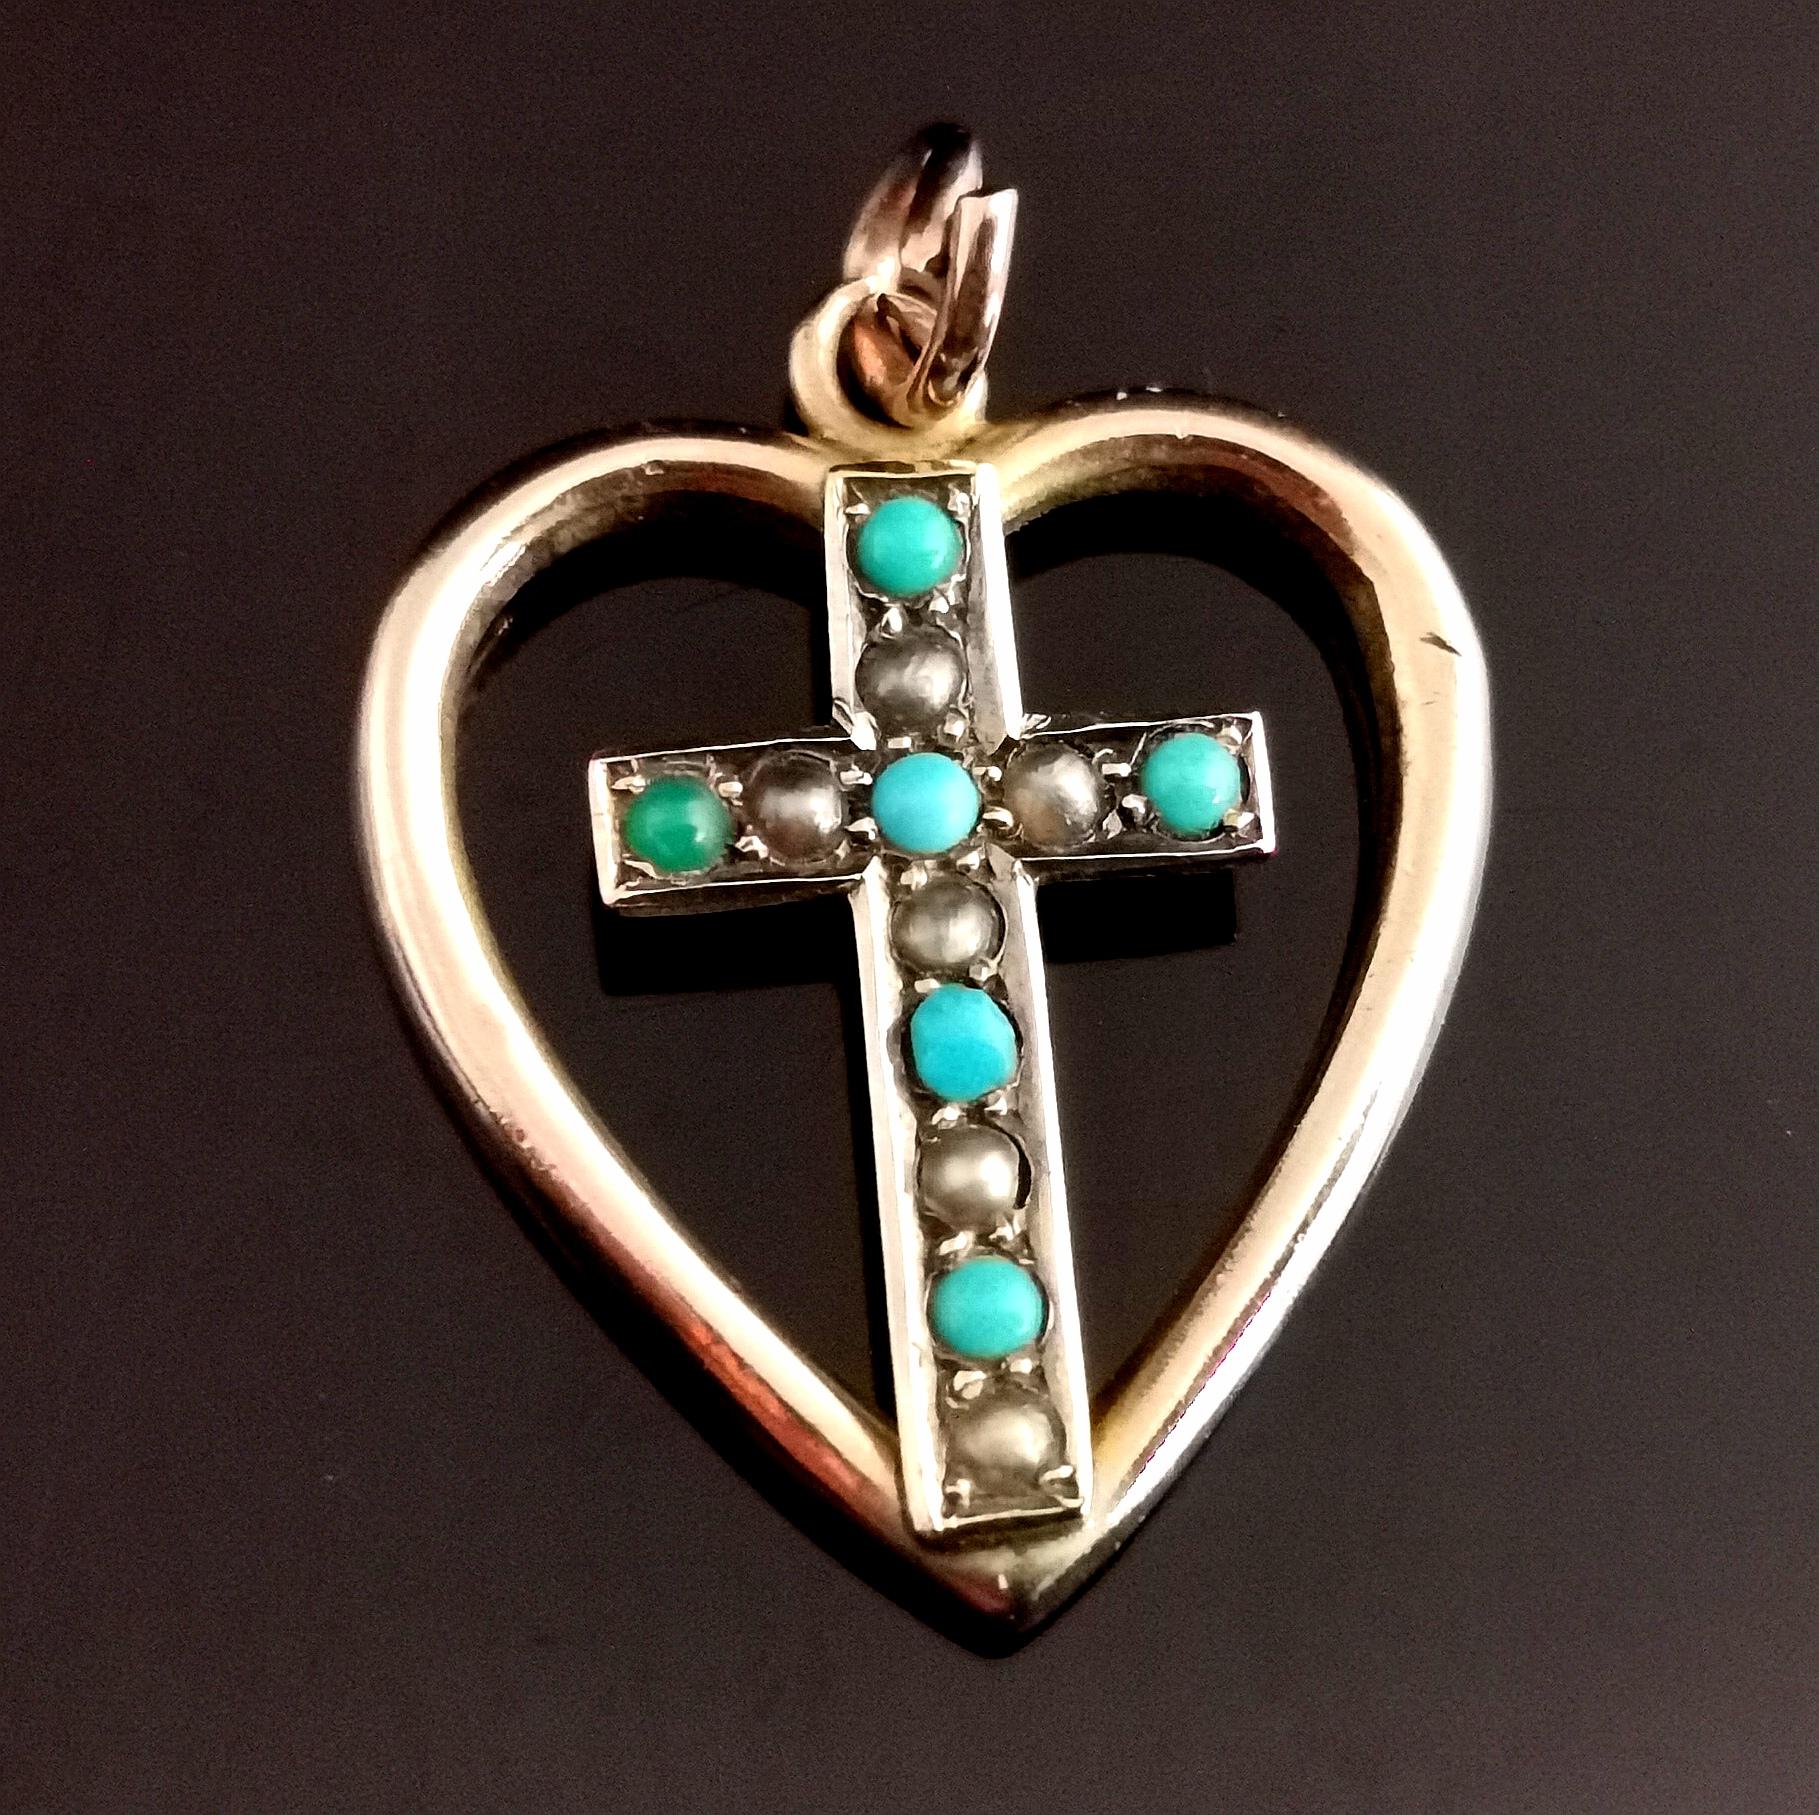 Cabochon Antique Heart and Cross Pendant, 9k Rose Gold, Turquoise and Seed Pearl